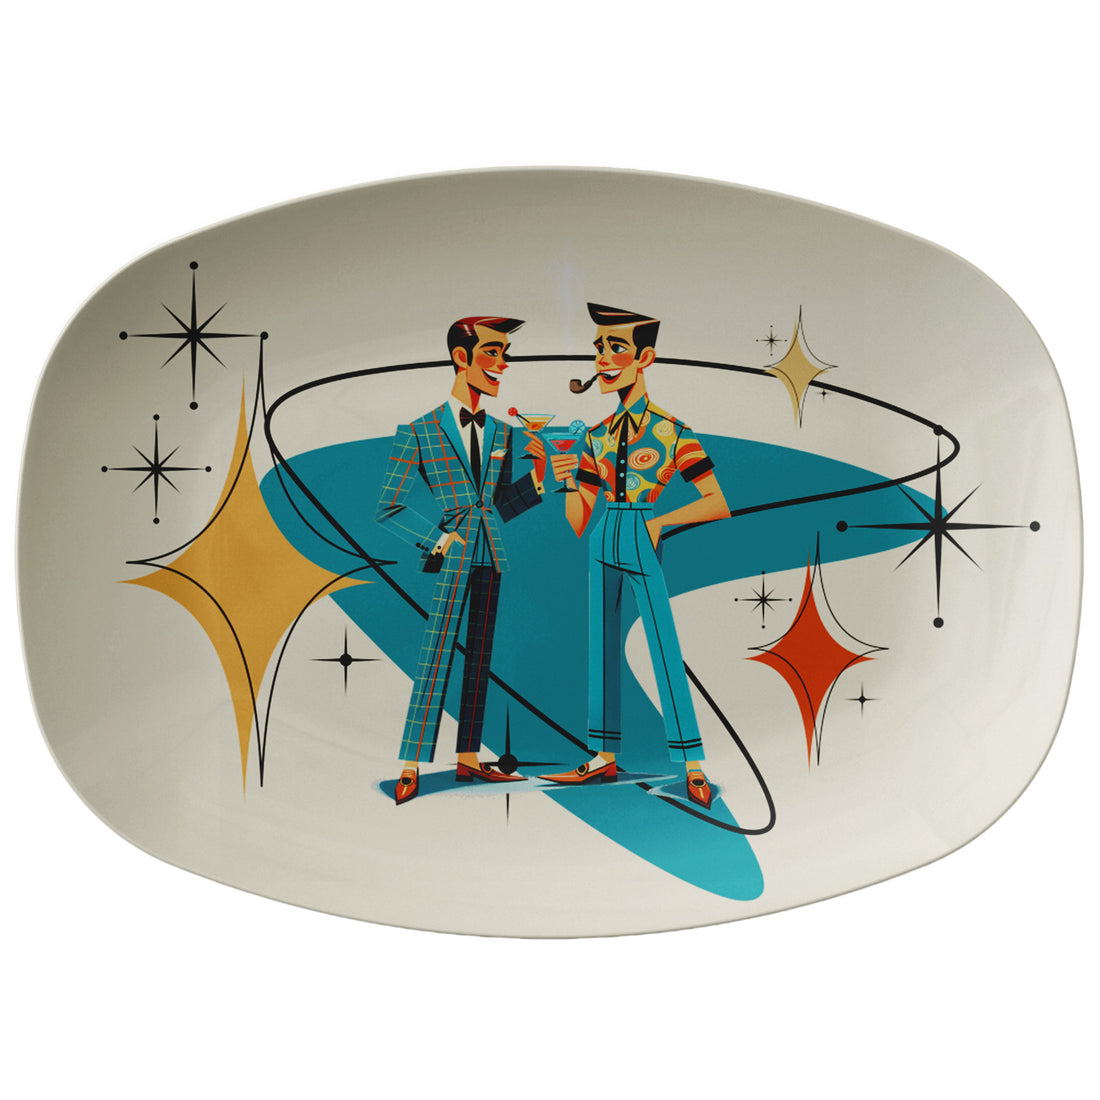 GAY MALE COUPLE SPECIAL GIFT, PRIDE MONTH, MID CENTURY MODERN Party Platter